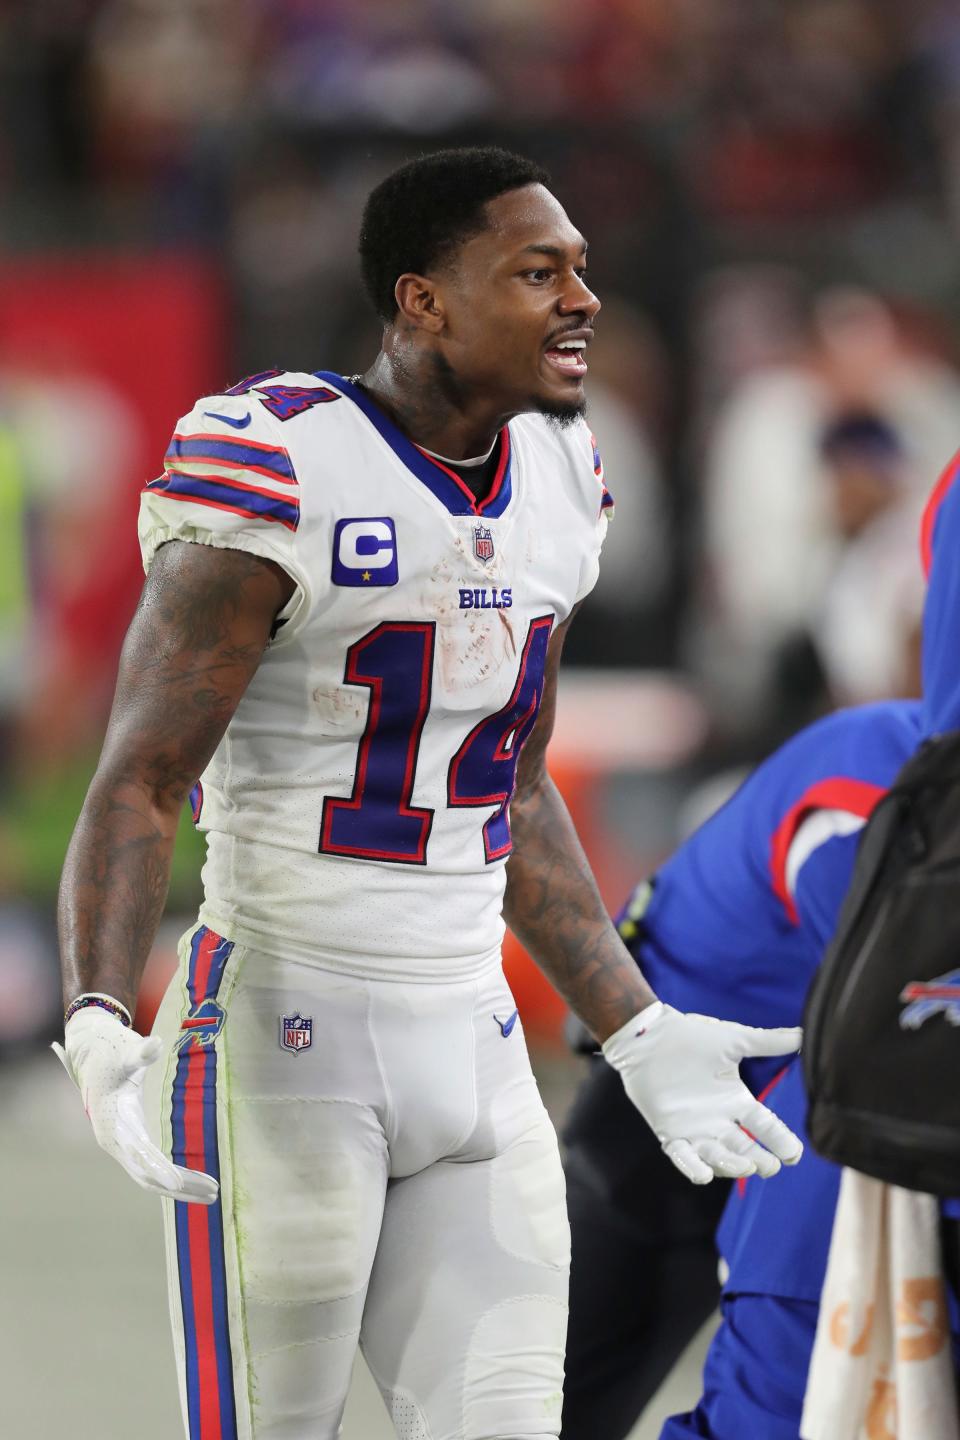 Buffalo Bills wide receiver Stefon Diggs (14) talks to teammates on the sideline during a NFL football game against the Tampa Bay Buccaneers, Sunday, Dec.12, 2021 in Tampa, Fla.